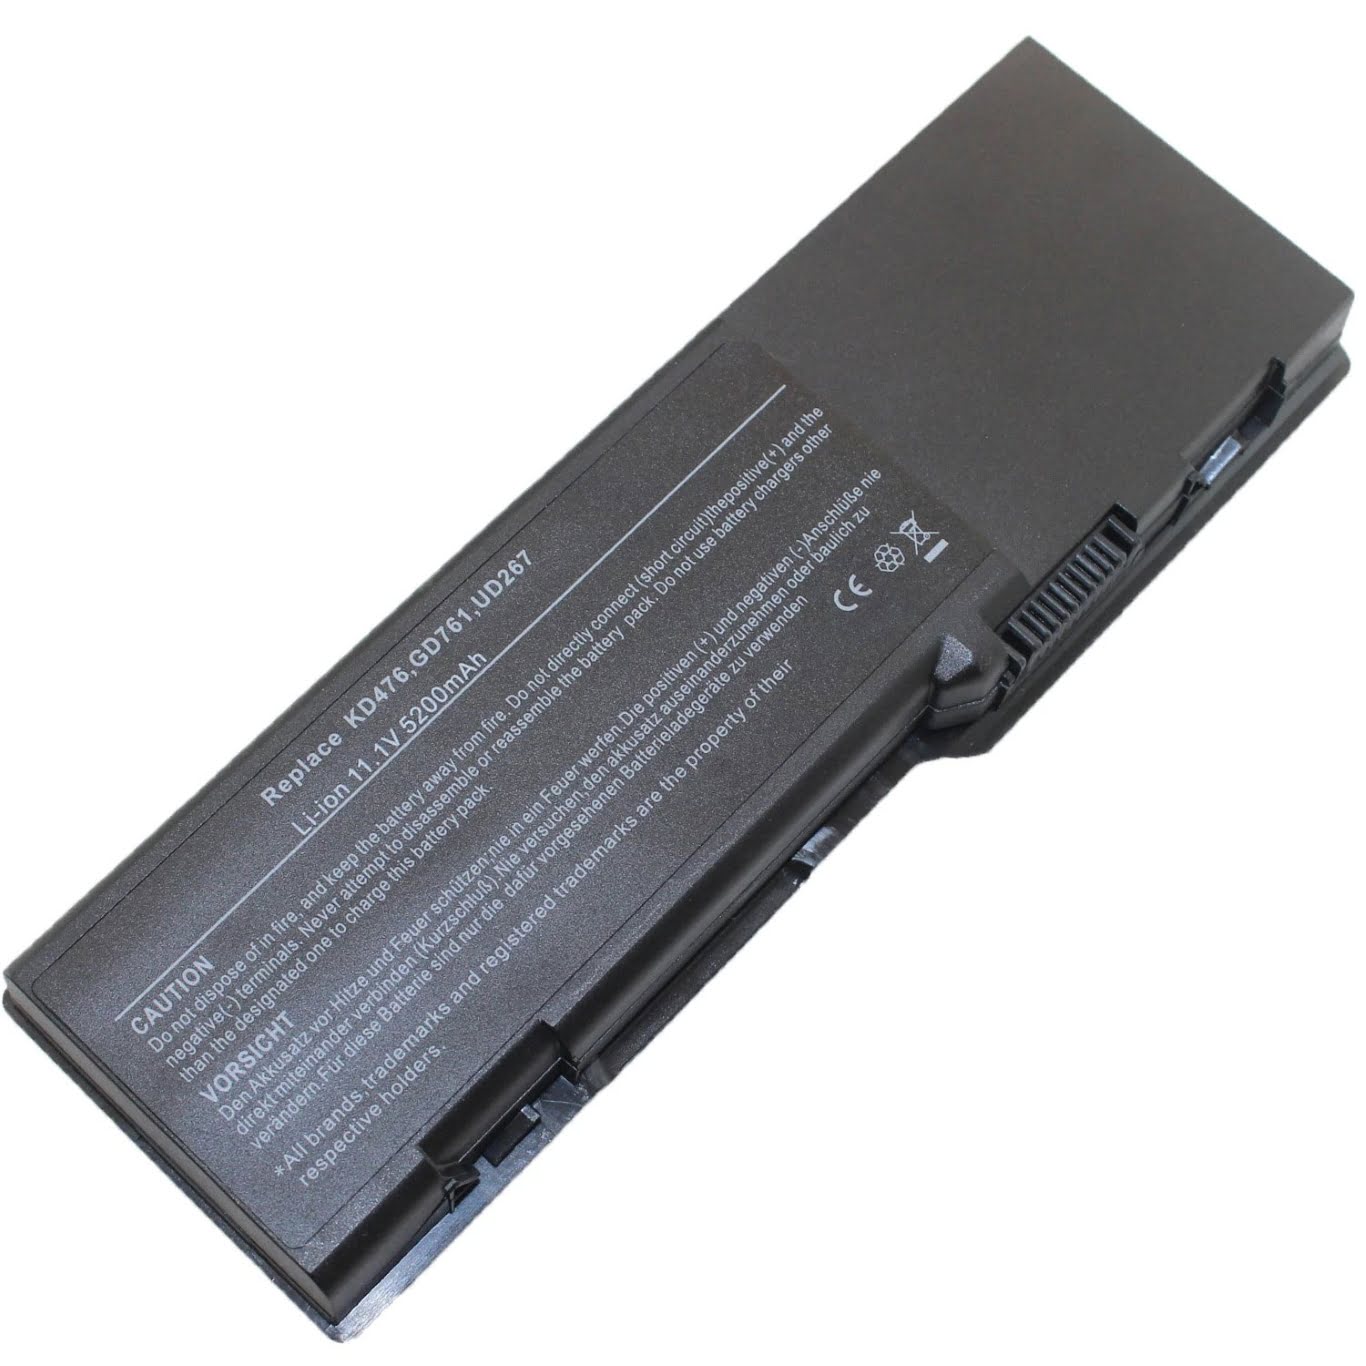 Dell 312-0461, Gd761 Laptop Battery For Inspiron 1501, Inspiron 6400 replacement